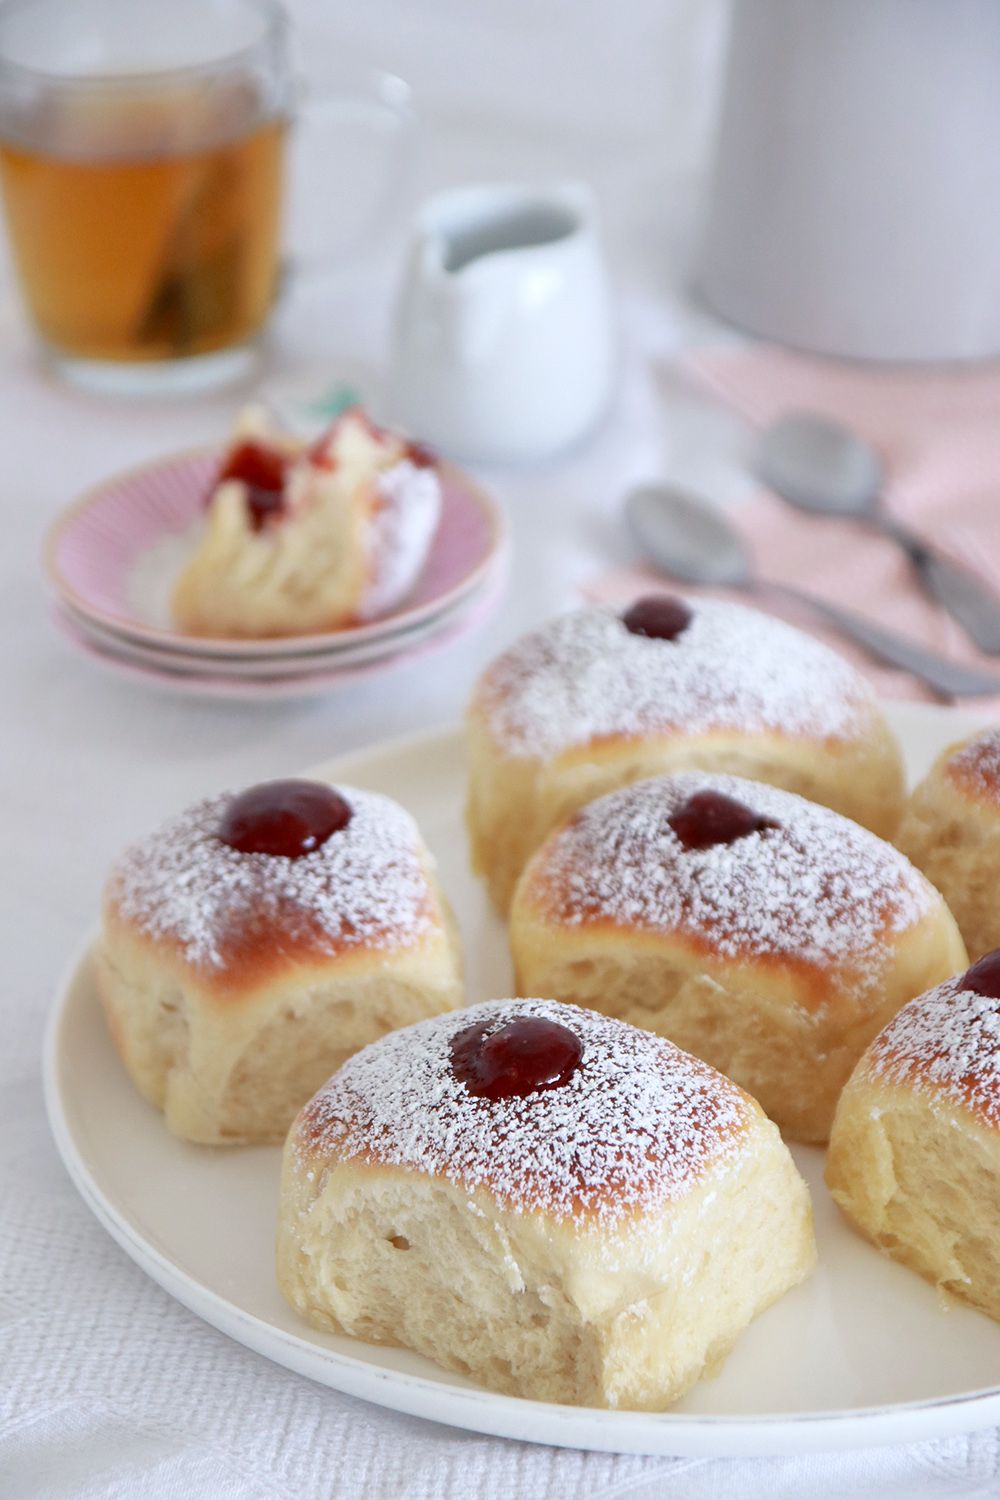 Baked Brioche Doughnuts Filled with Jam | Photo: Natalie Levin